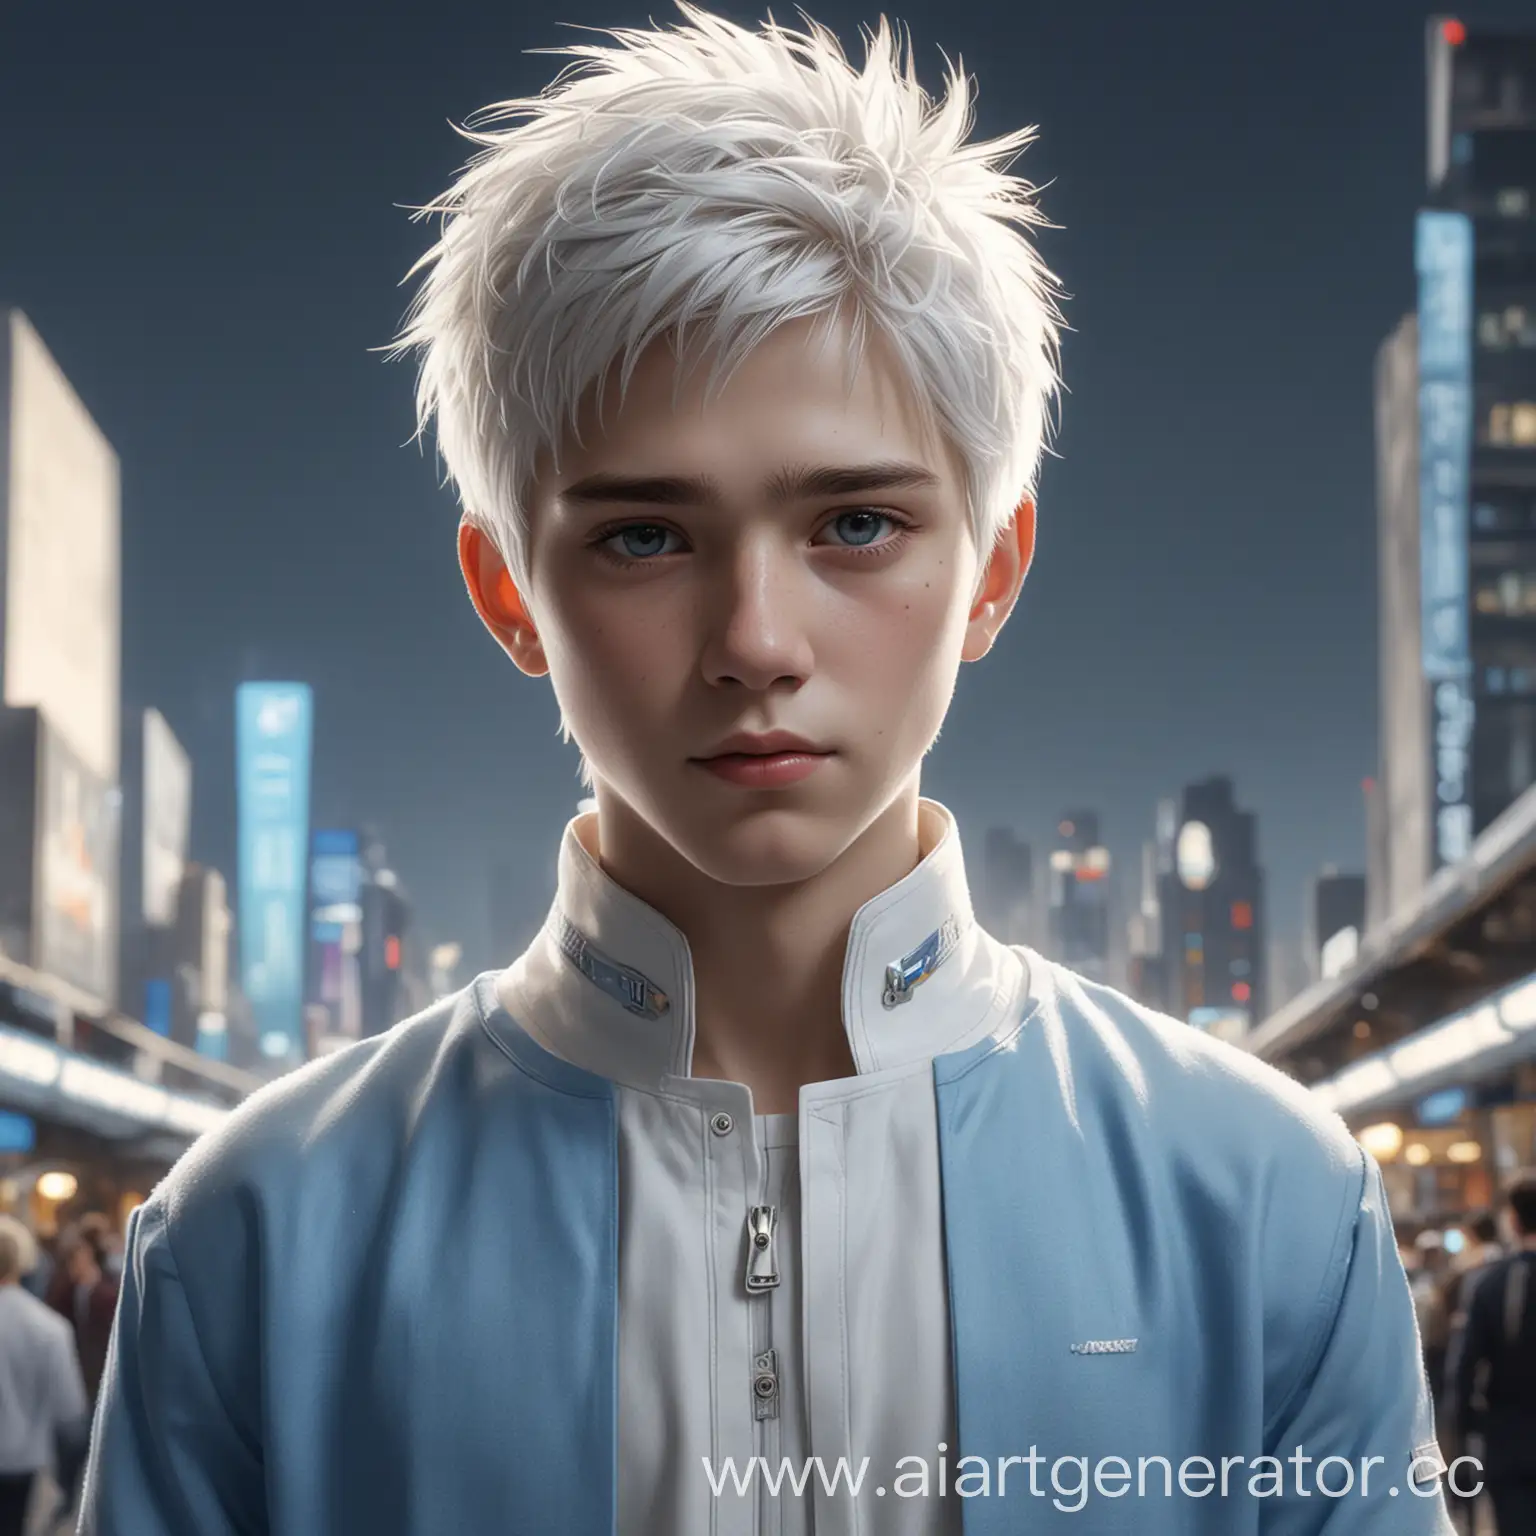 Highest image quality, outstanding details, ultra-high resolution, (realism: 1.4), the best illustration, favor details, highly condensed 1boy, with a delicate face, dressed in a white and blue modern clothes, white hair, the background is a high-tech lighting scene of the future city.